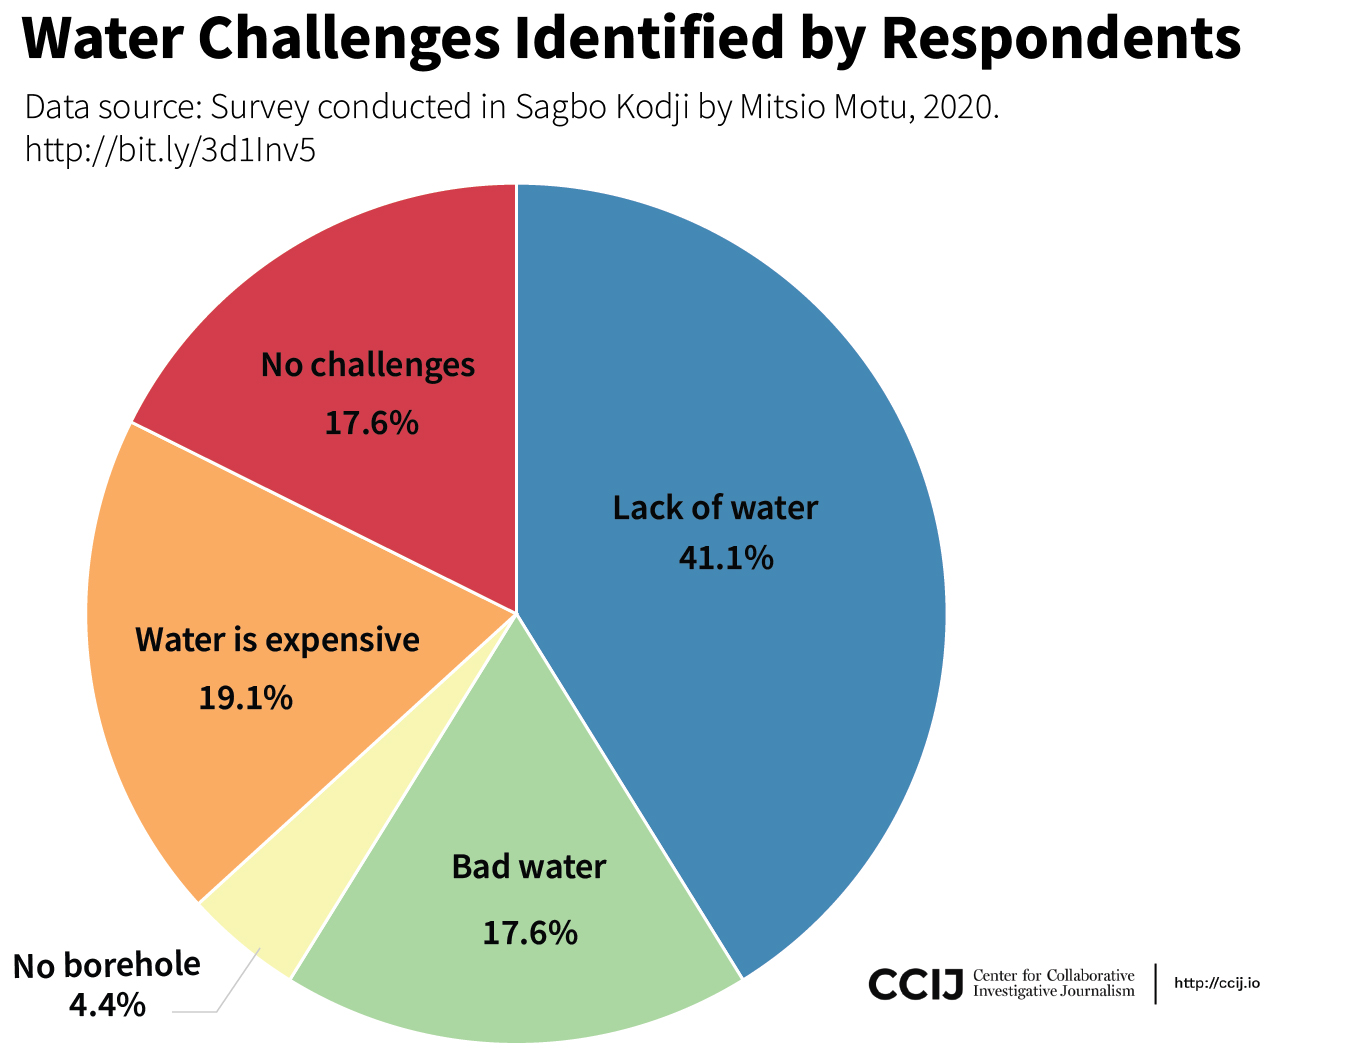 Pie chart displaying water challenges